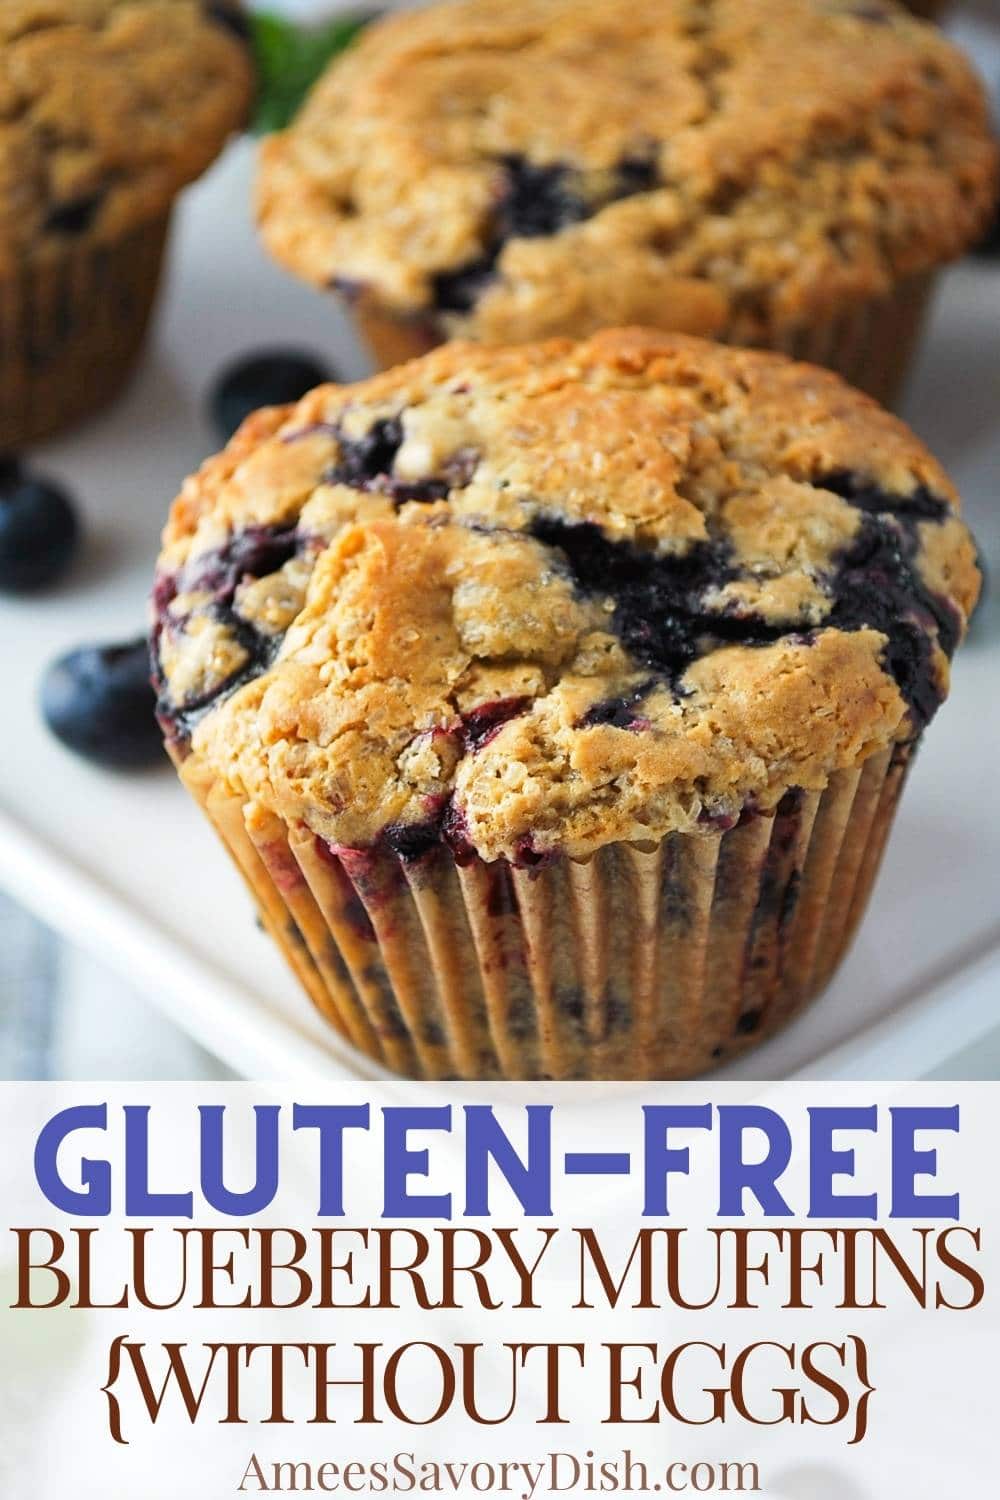 This EASY Eggless Blueberry Muffins recipe makes the best gluten-free muffins entirely from scratch. These soft, buttery, and blueberry-packed muffins are the perfect morning treat. via @Ameessavorydish